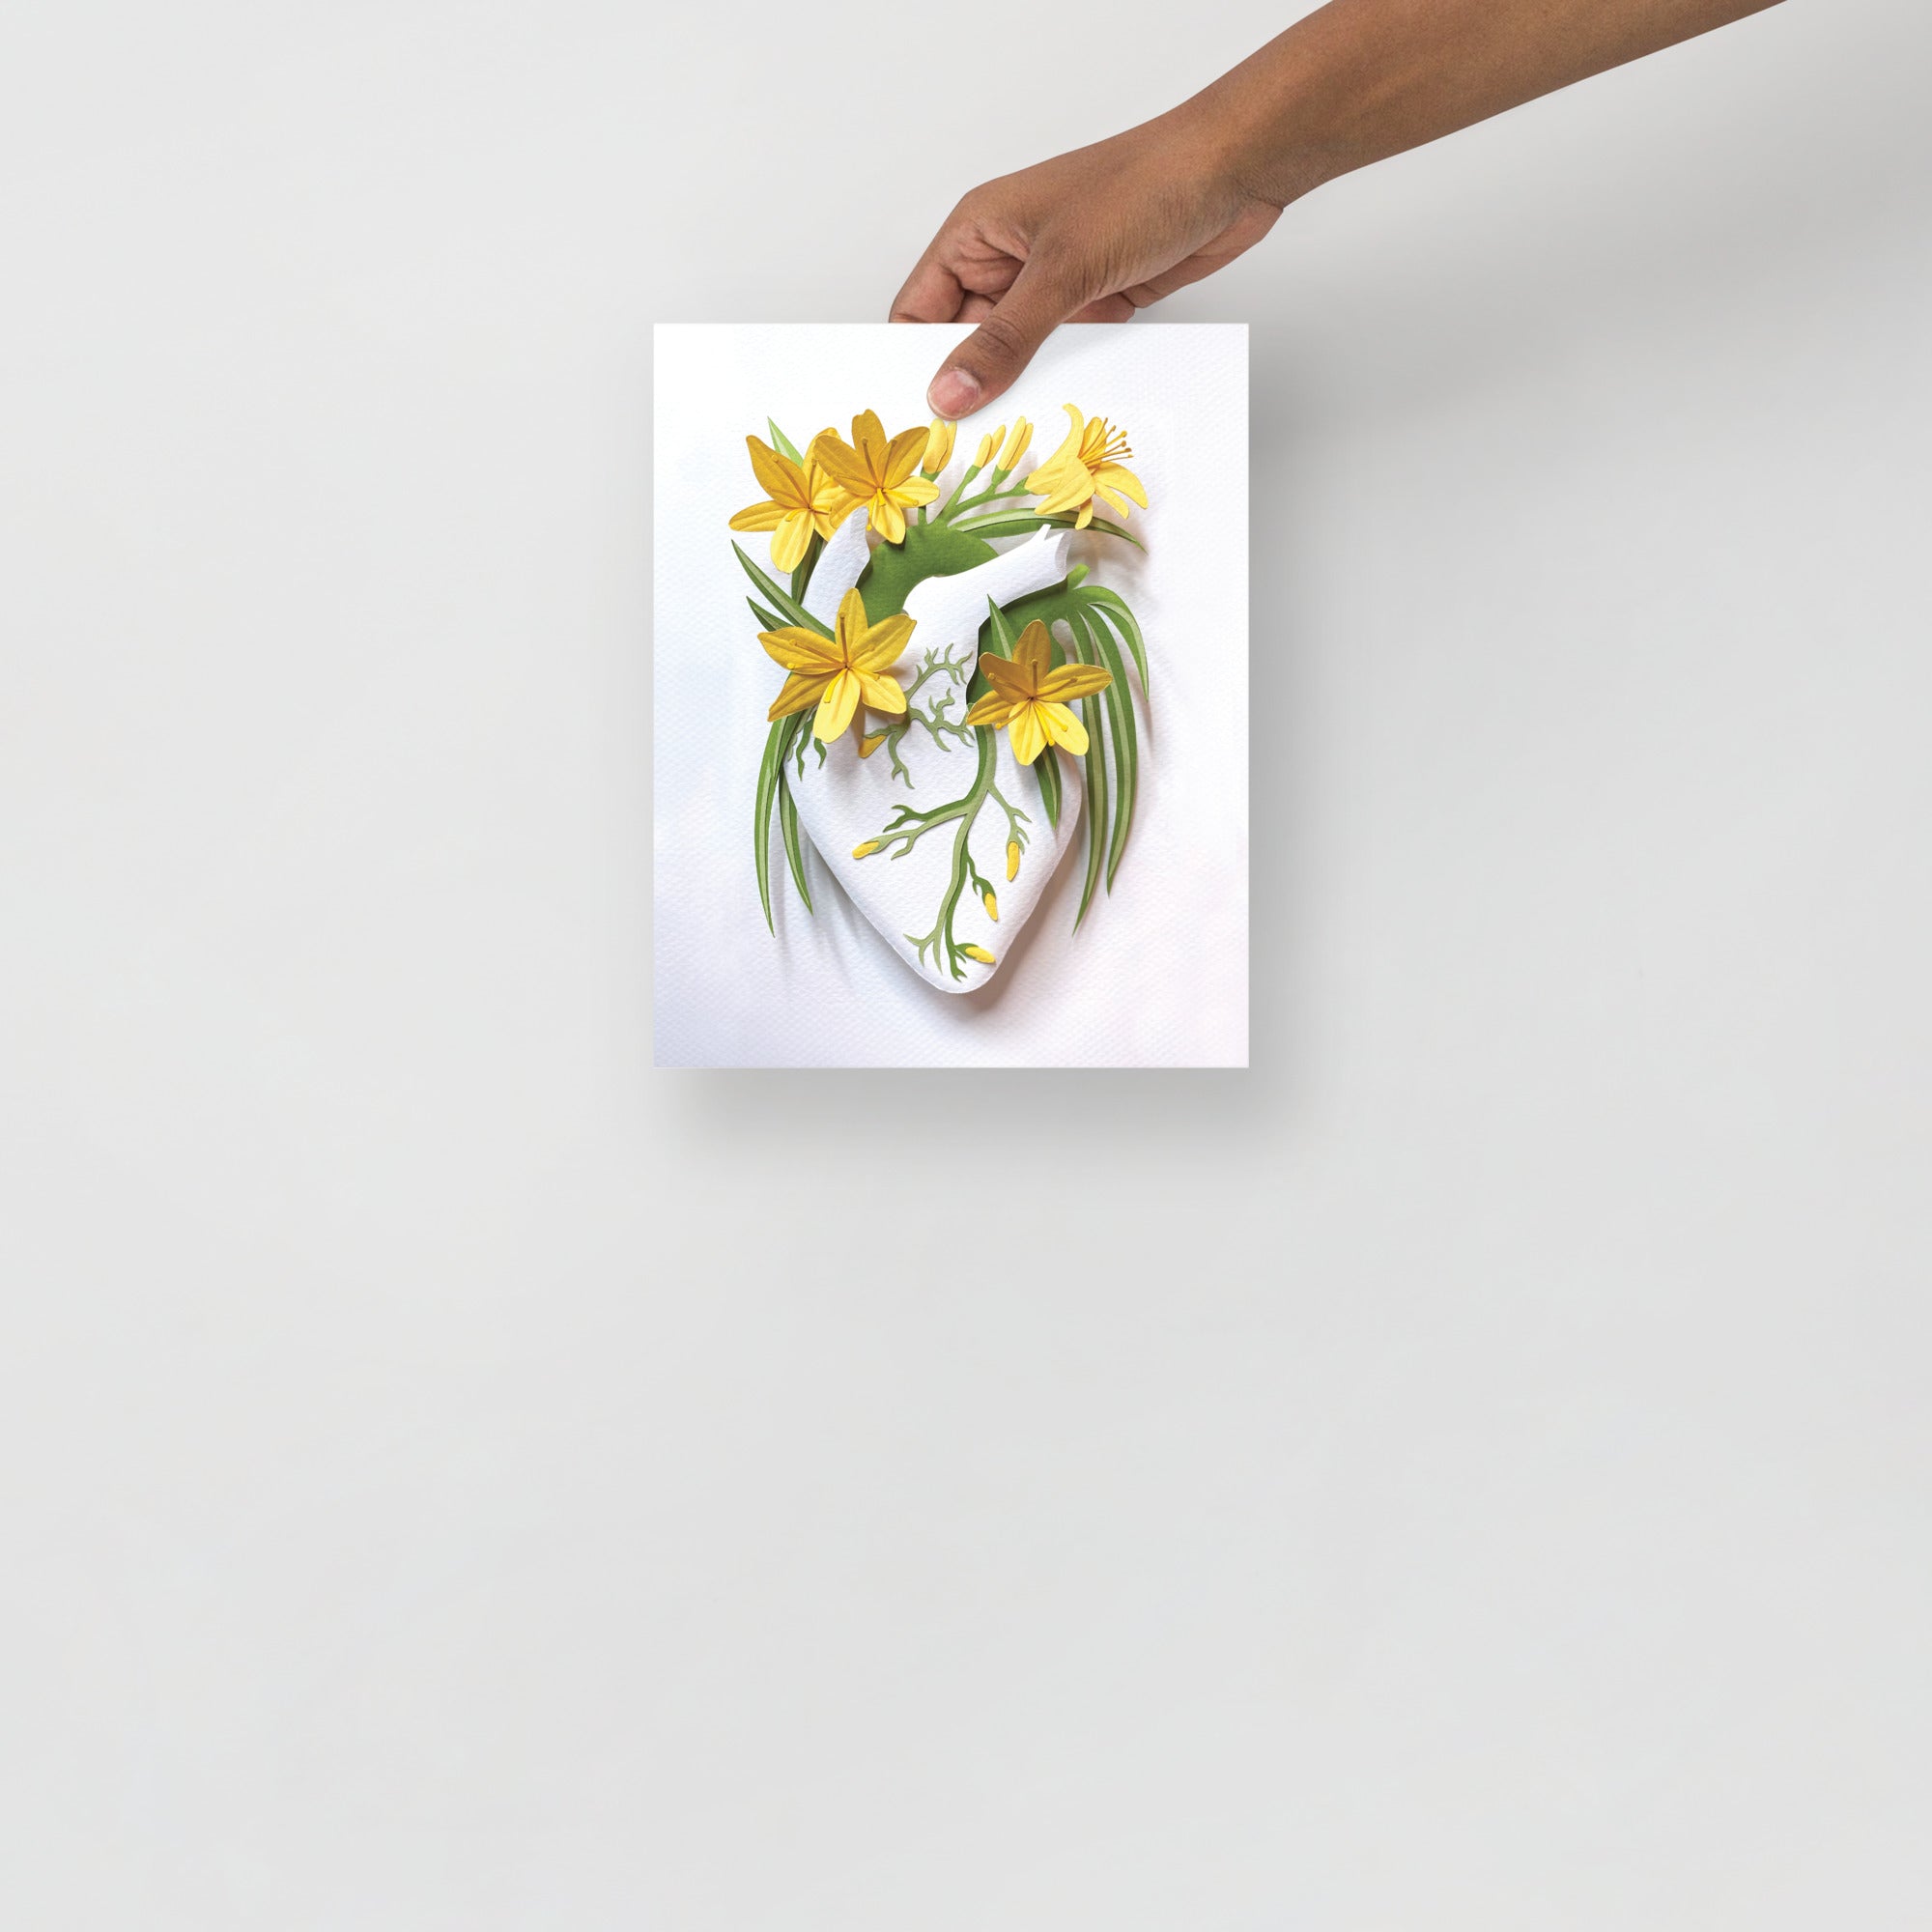 Anatomical heart with yellow daylilies made of hand cut paper